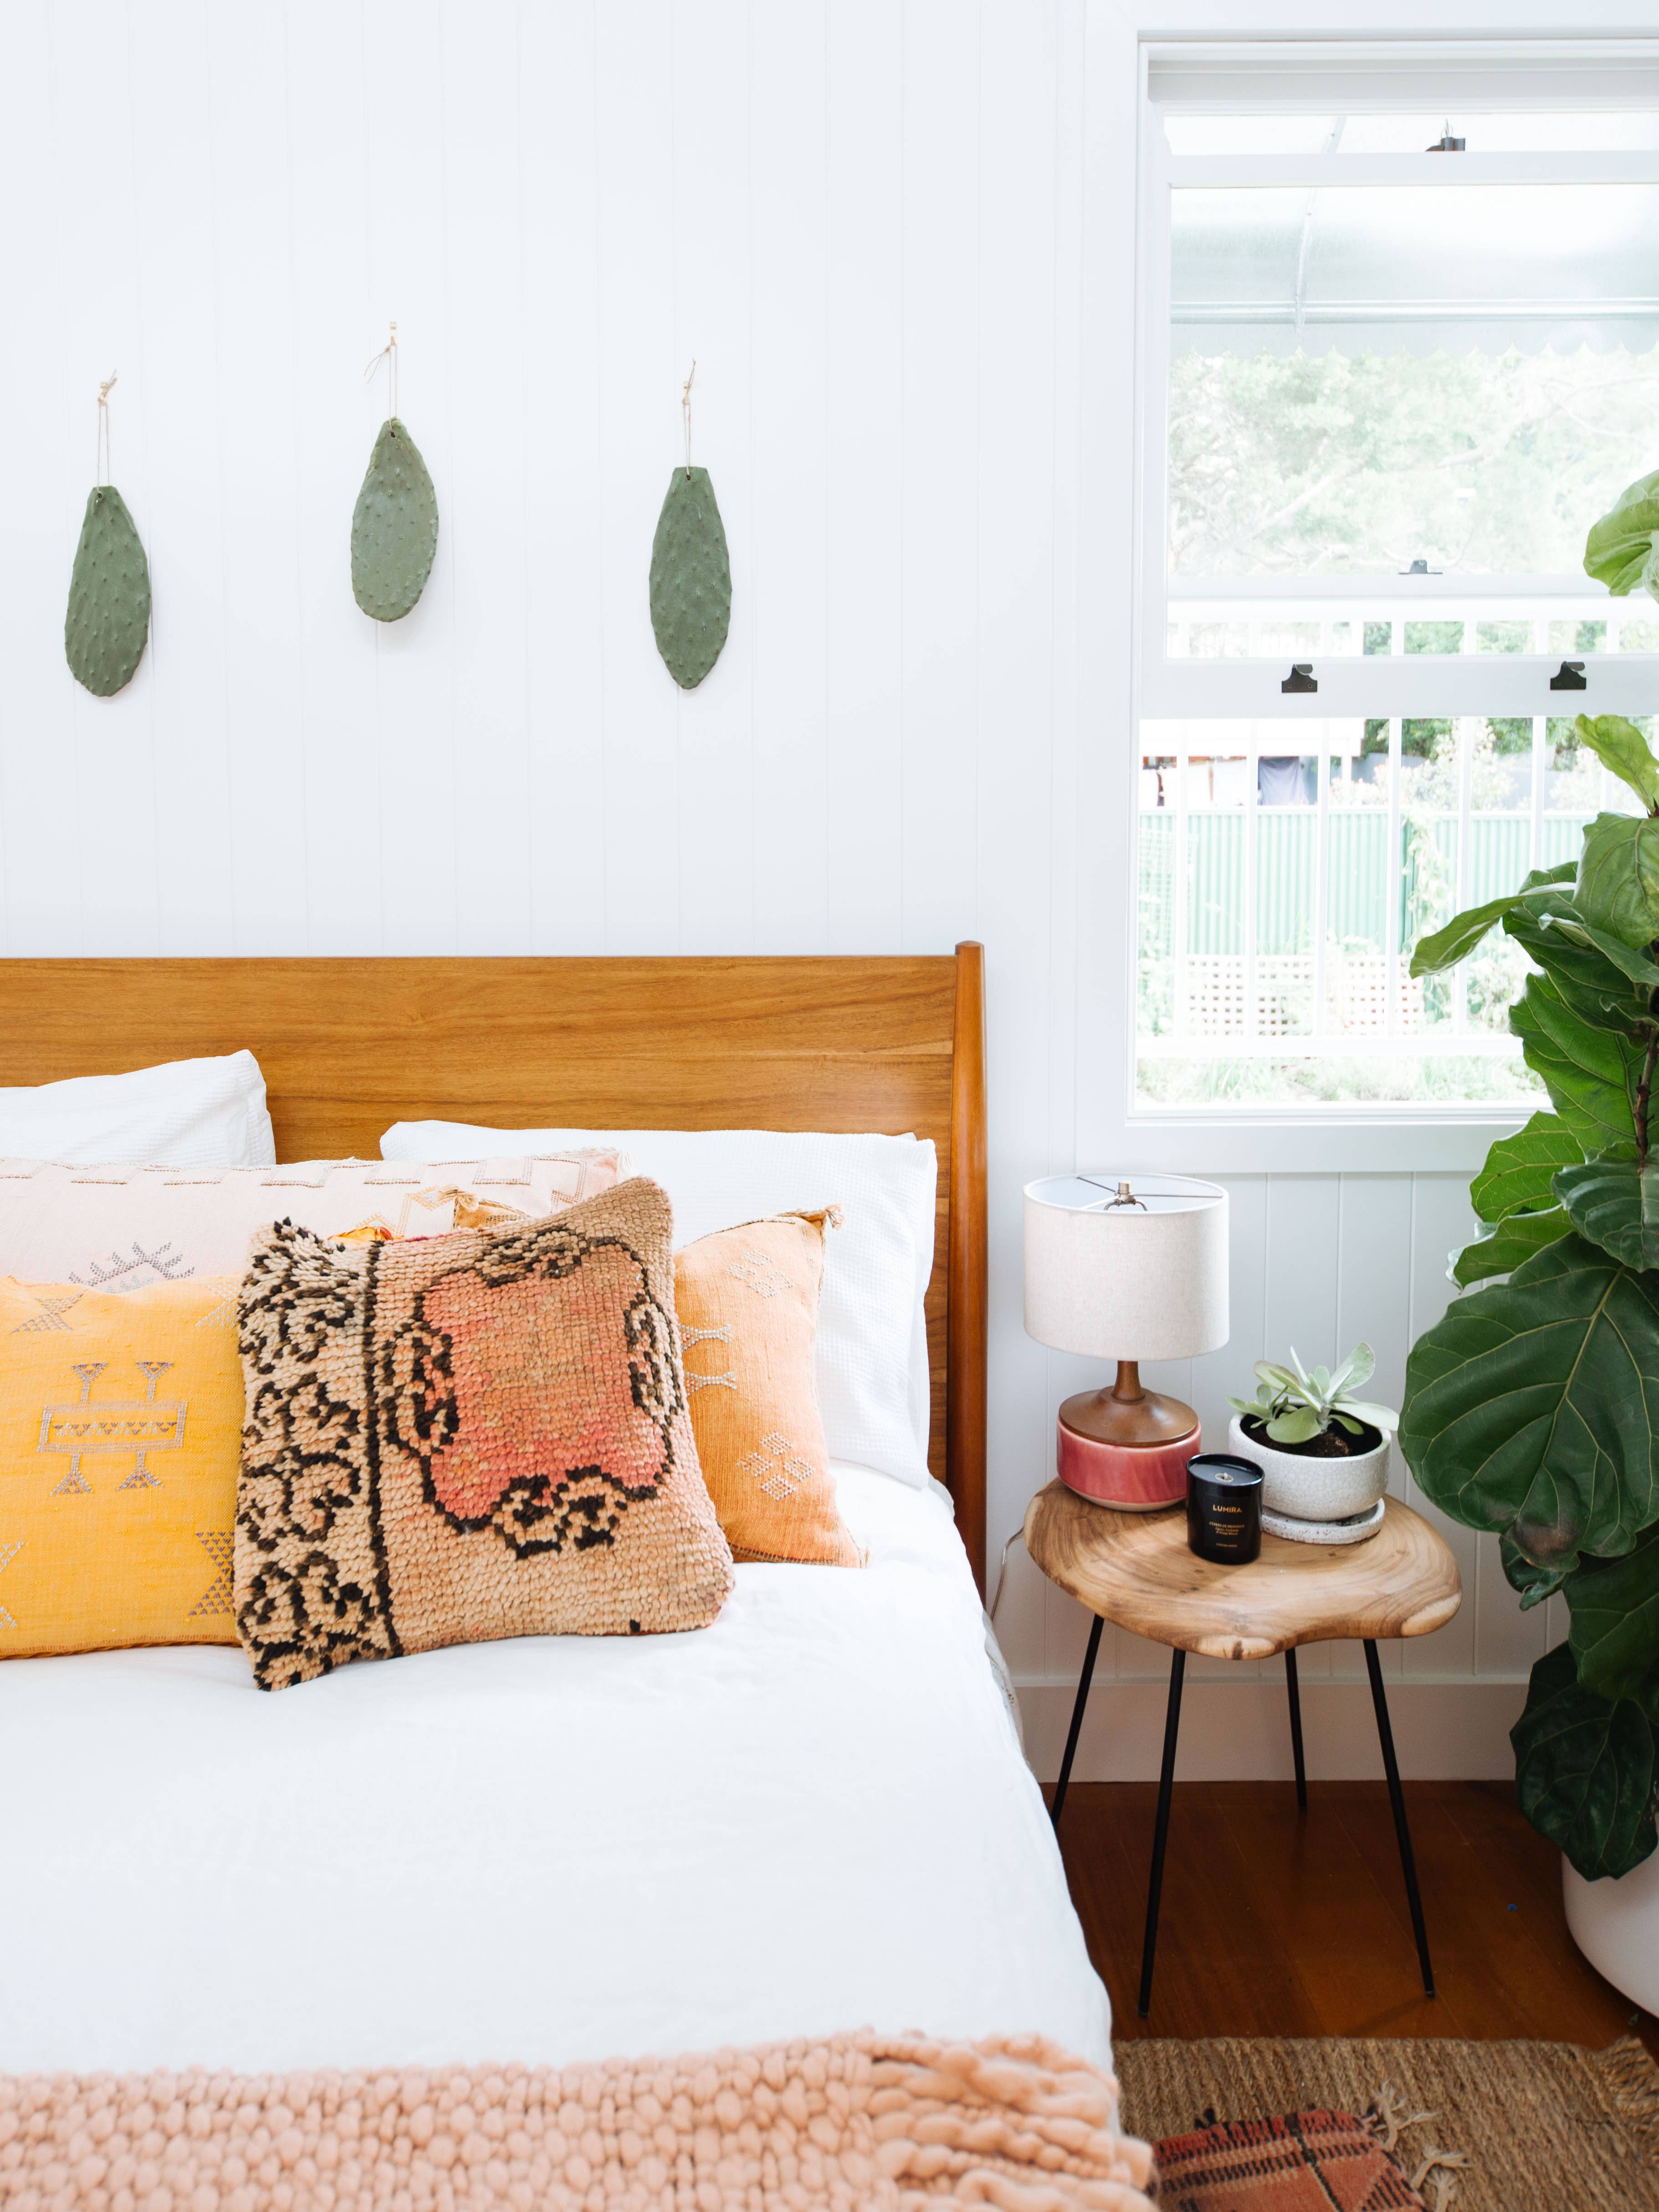 This Blogger Built Her Dream Bedroom Entirely From Scratch